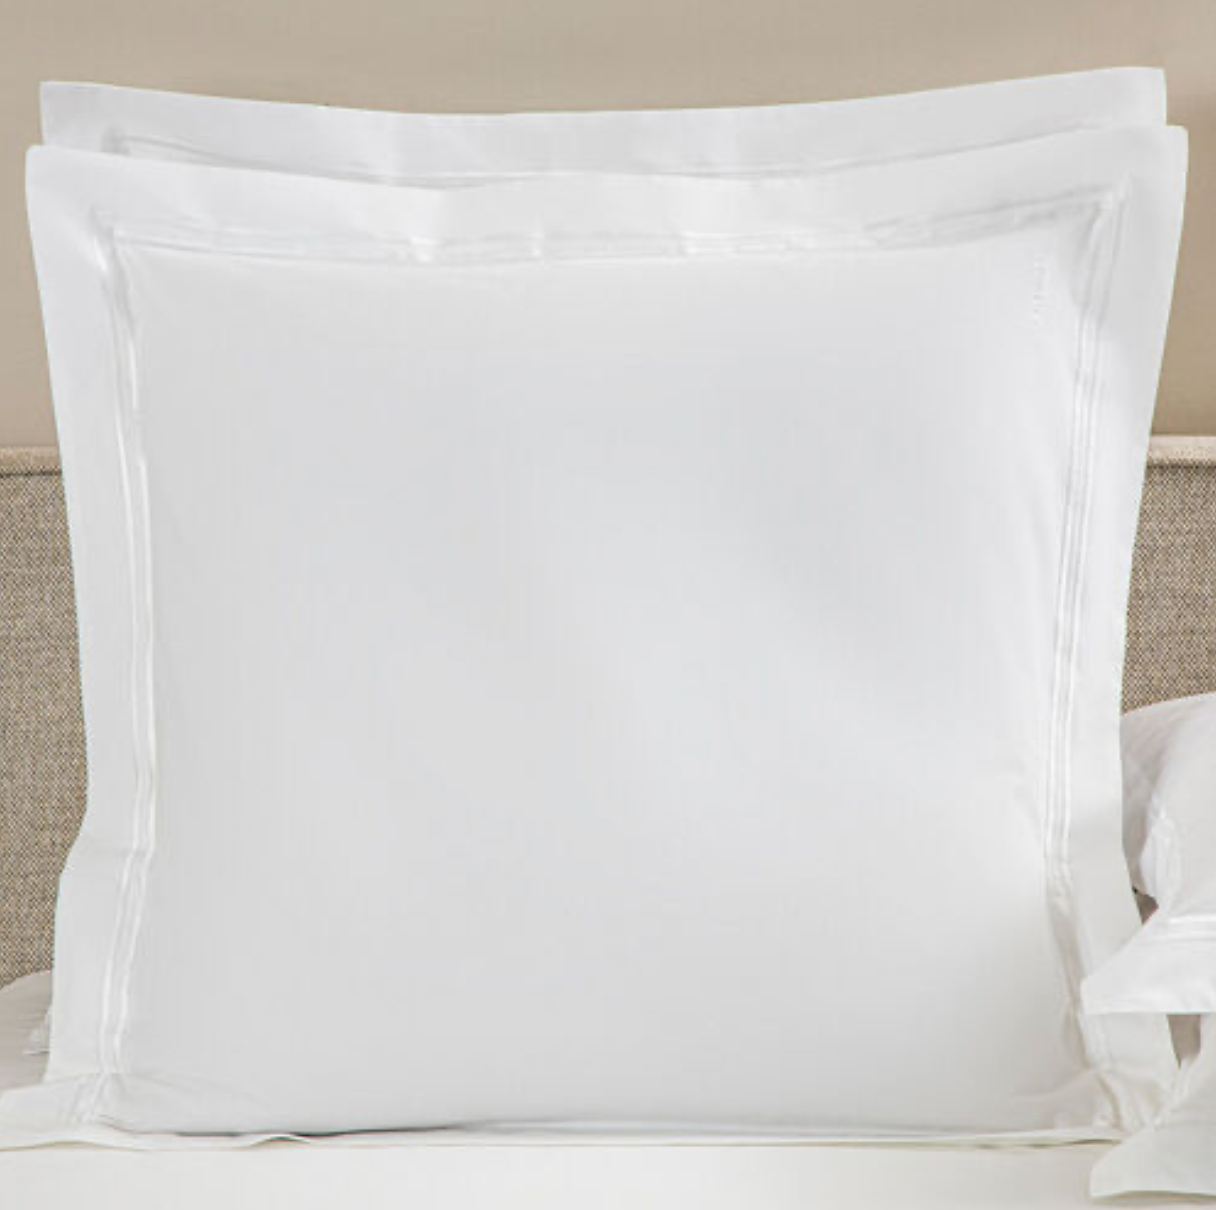 Frette Classic Collection Hand Towel - White